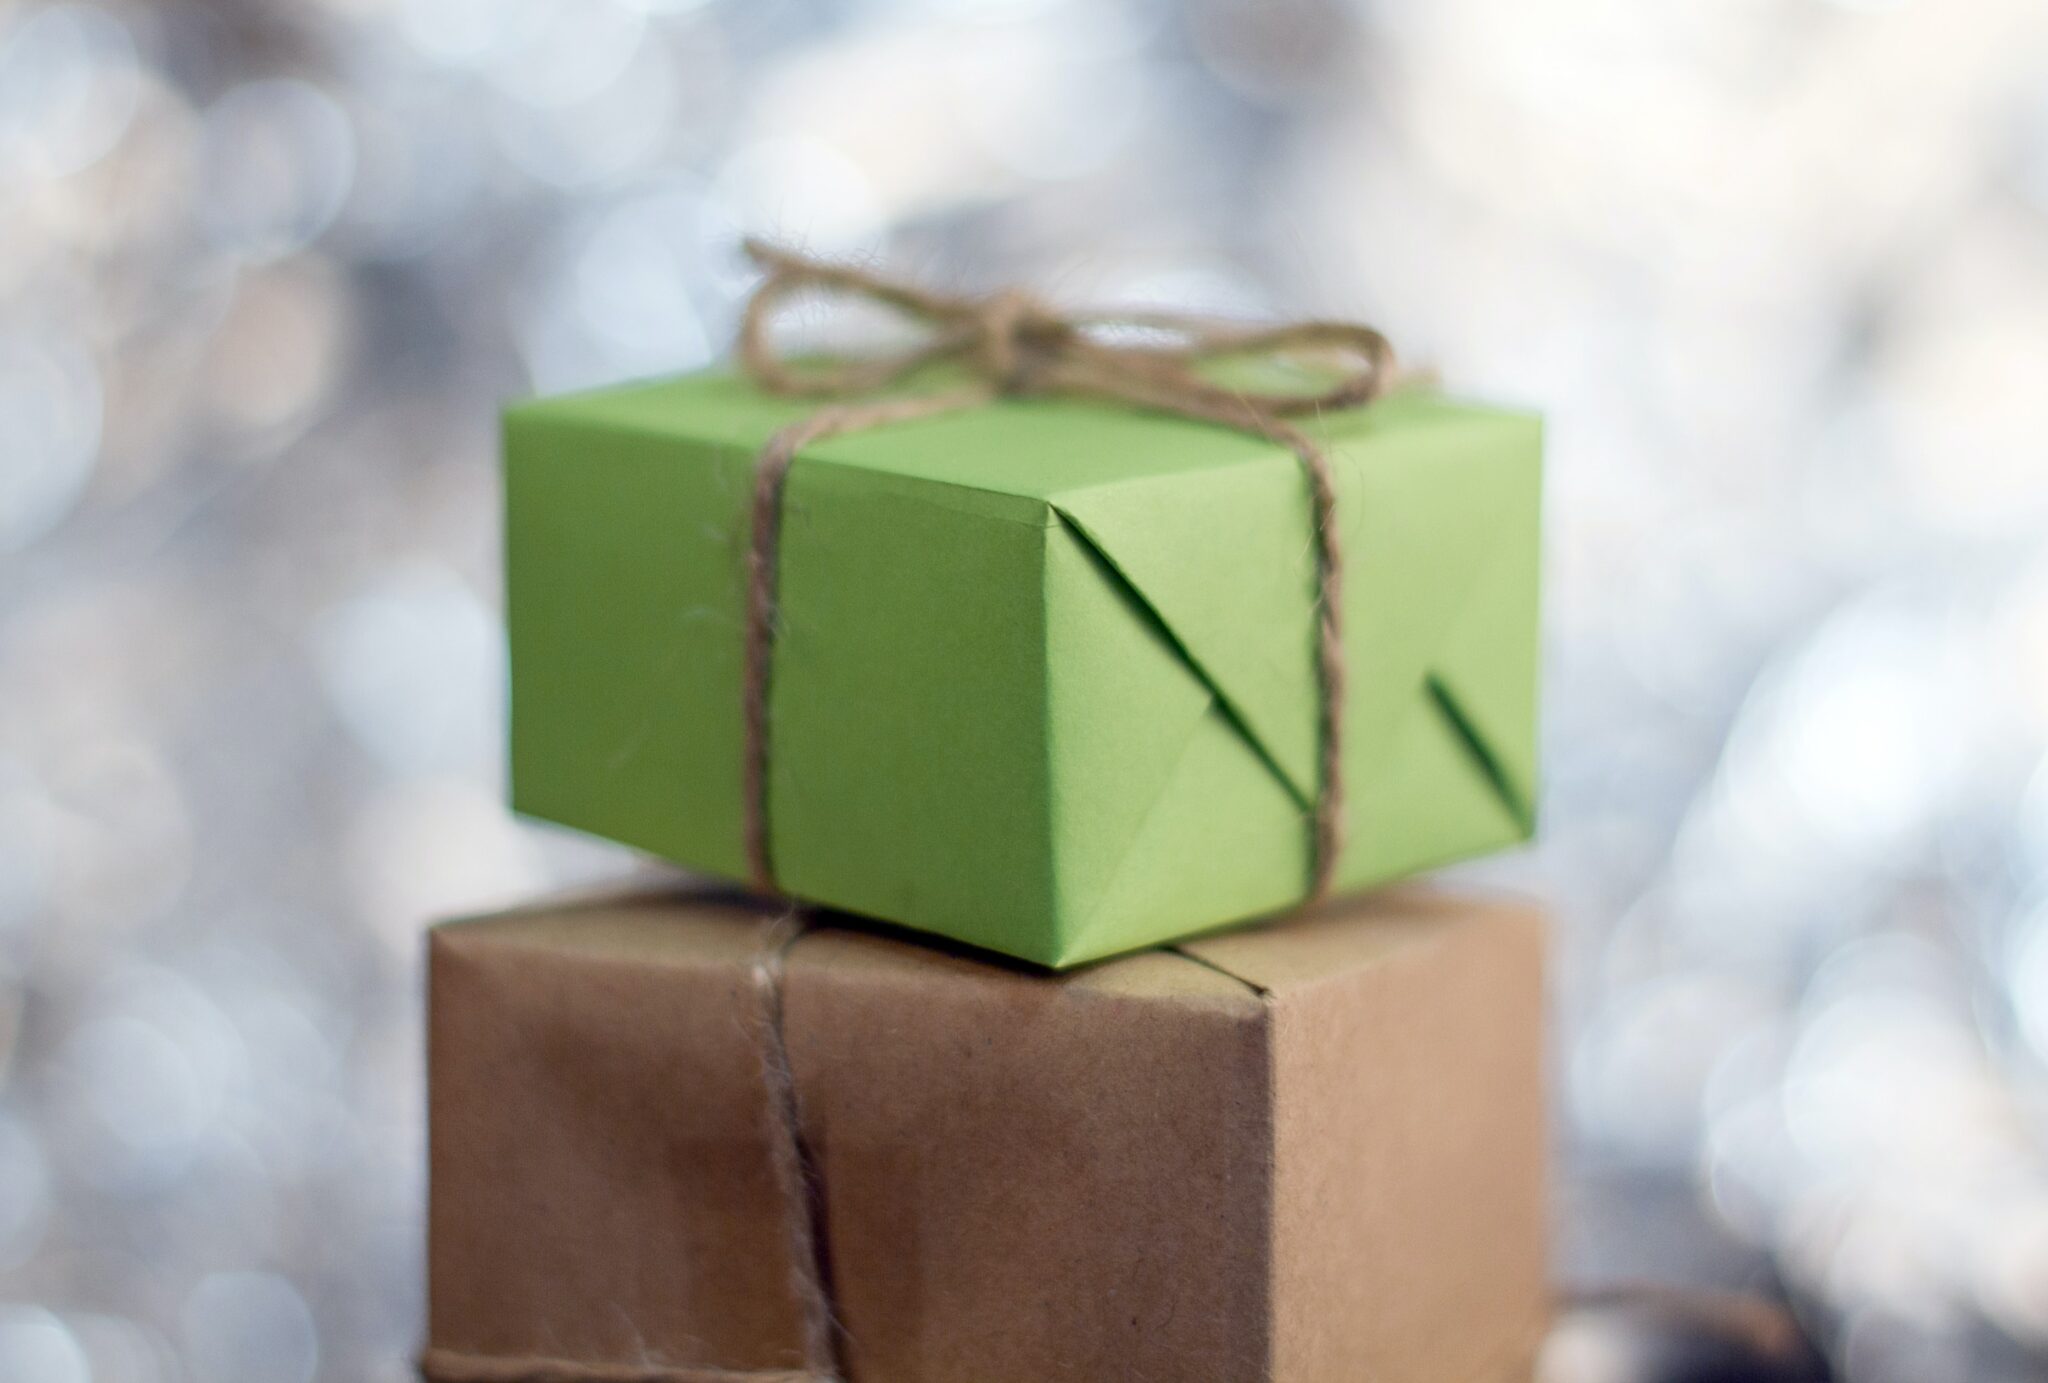 A box wrapped in green paper and tied with brown twine sits atop a box wrapped in brown paper tied with brown twine. Blurred twinkle lights are behind them.